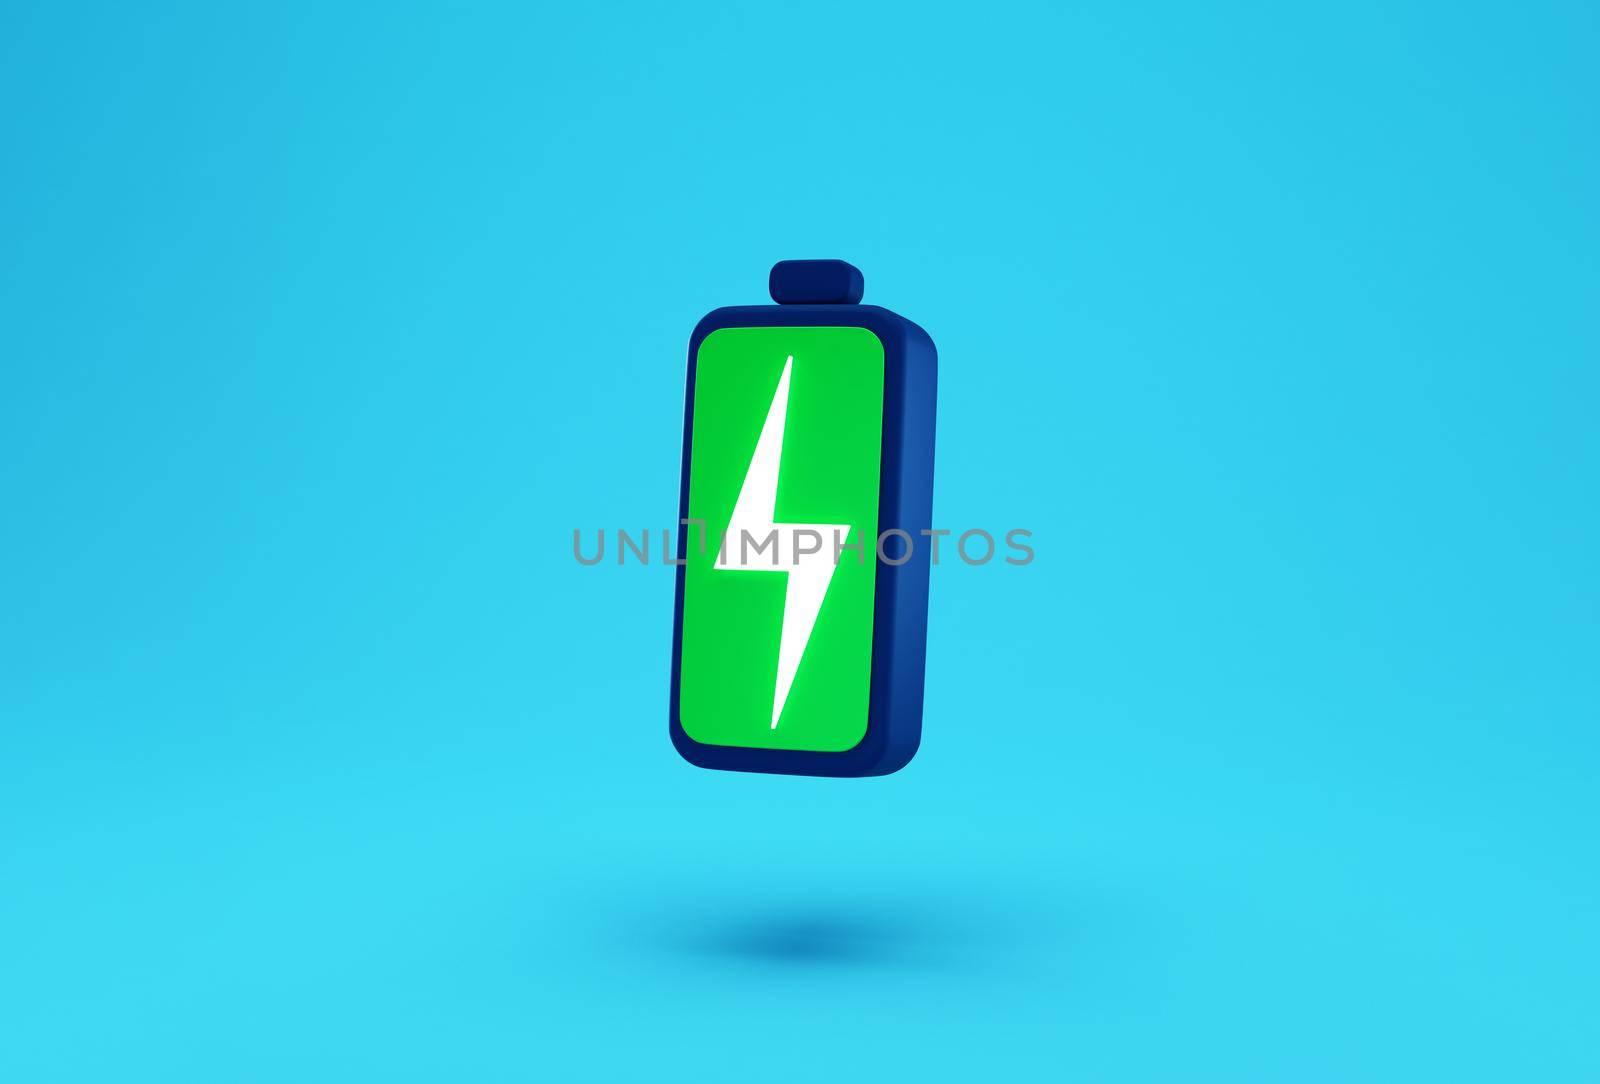 Green battery with lightning bolt charge symbol creative concept. minimal cartoon battery icon on pastel blue background. Quick and fast charging concept. 3d rendering with copy space for text